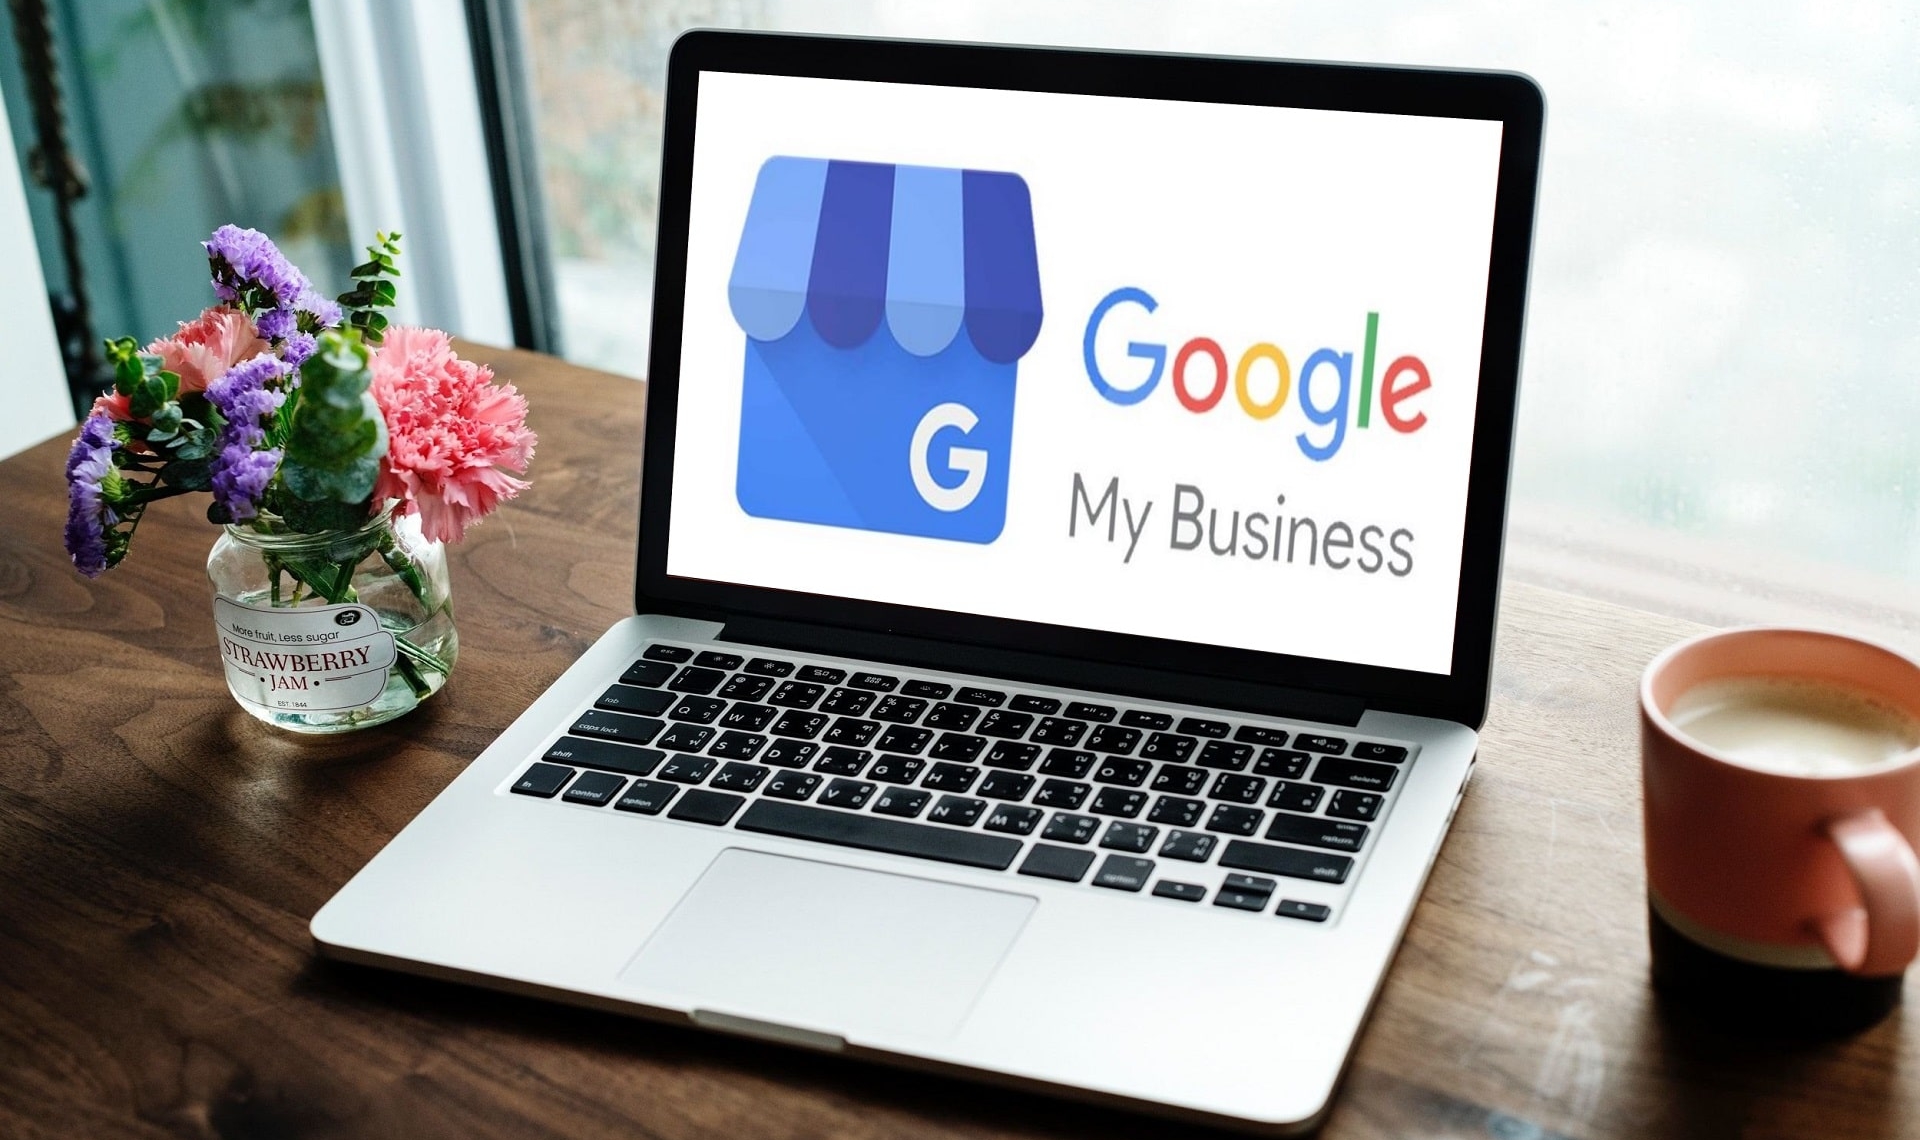 google my business support call hours